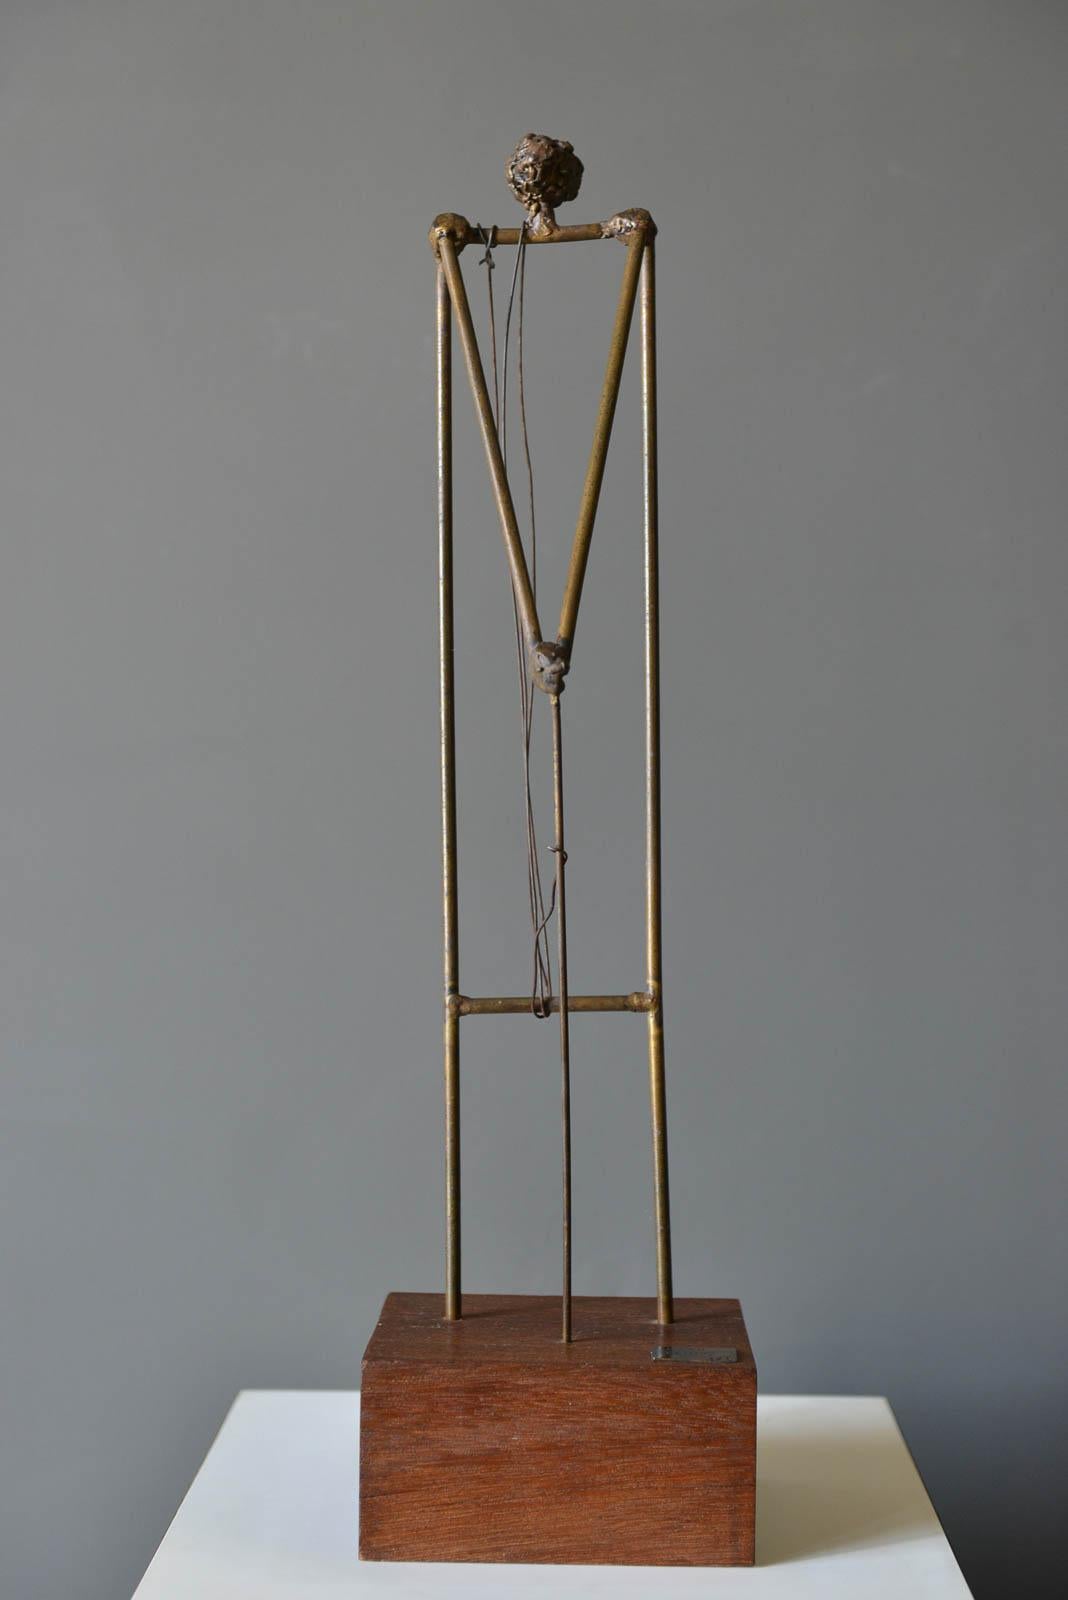 Figurative Bronze Sculpture by California Artist Ken Vares, 1968. One of a kind signed 1/1 sculpture on base with artist signature and date of 4/68. Bronze on walnut base. Measures 22